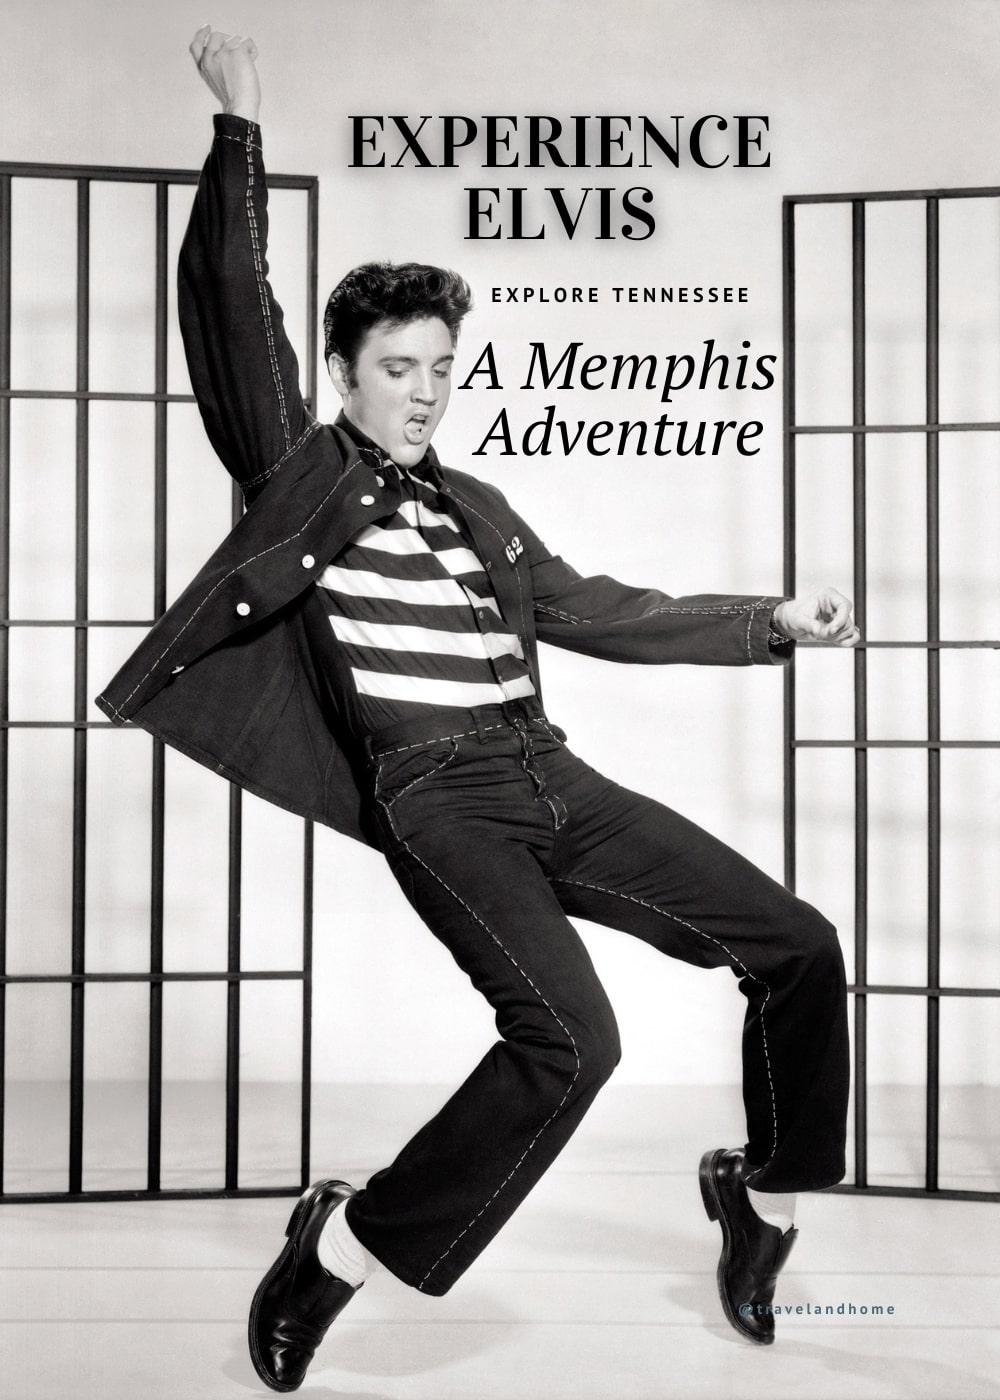 Exprience Elvis Presley a Memphis adventure in Tennessee North America min